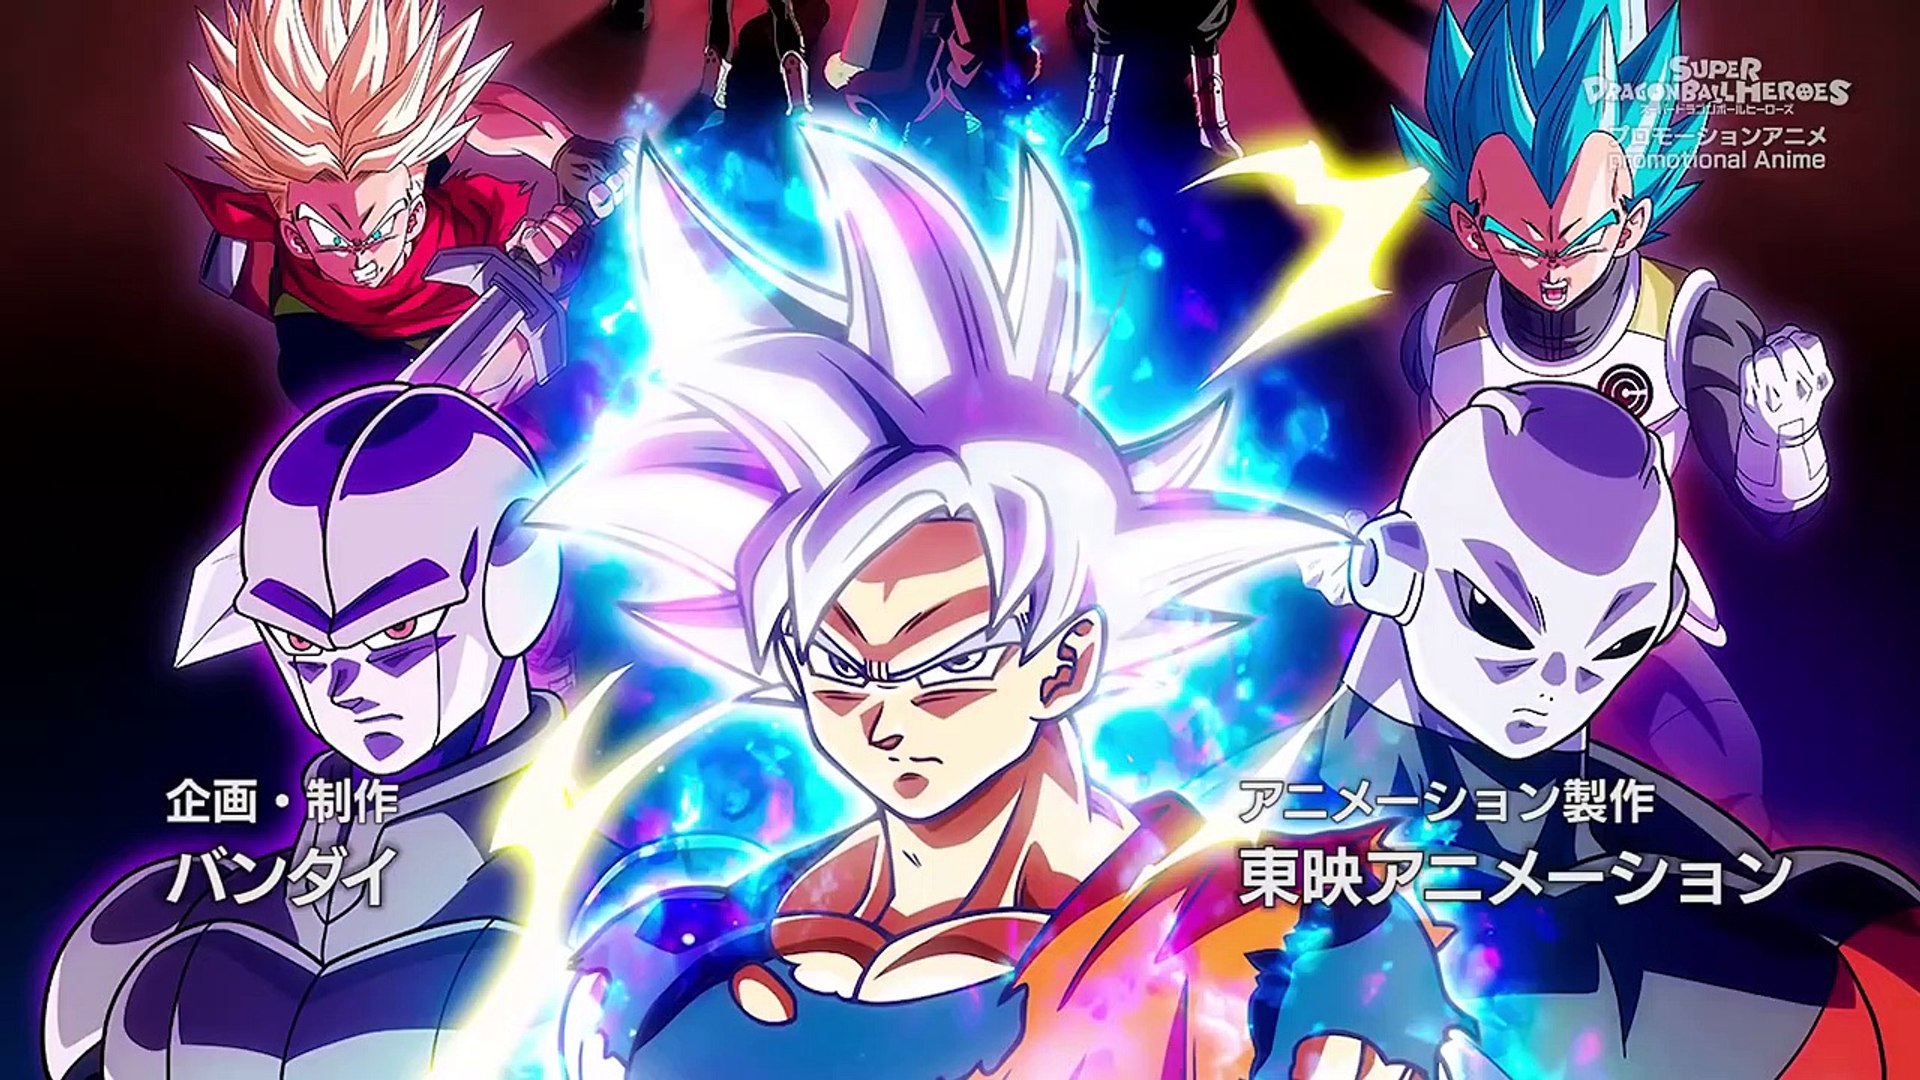 Super Dragon Ball Heroes Full Episodes by Anime Instincts - Dailymotion